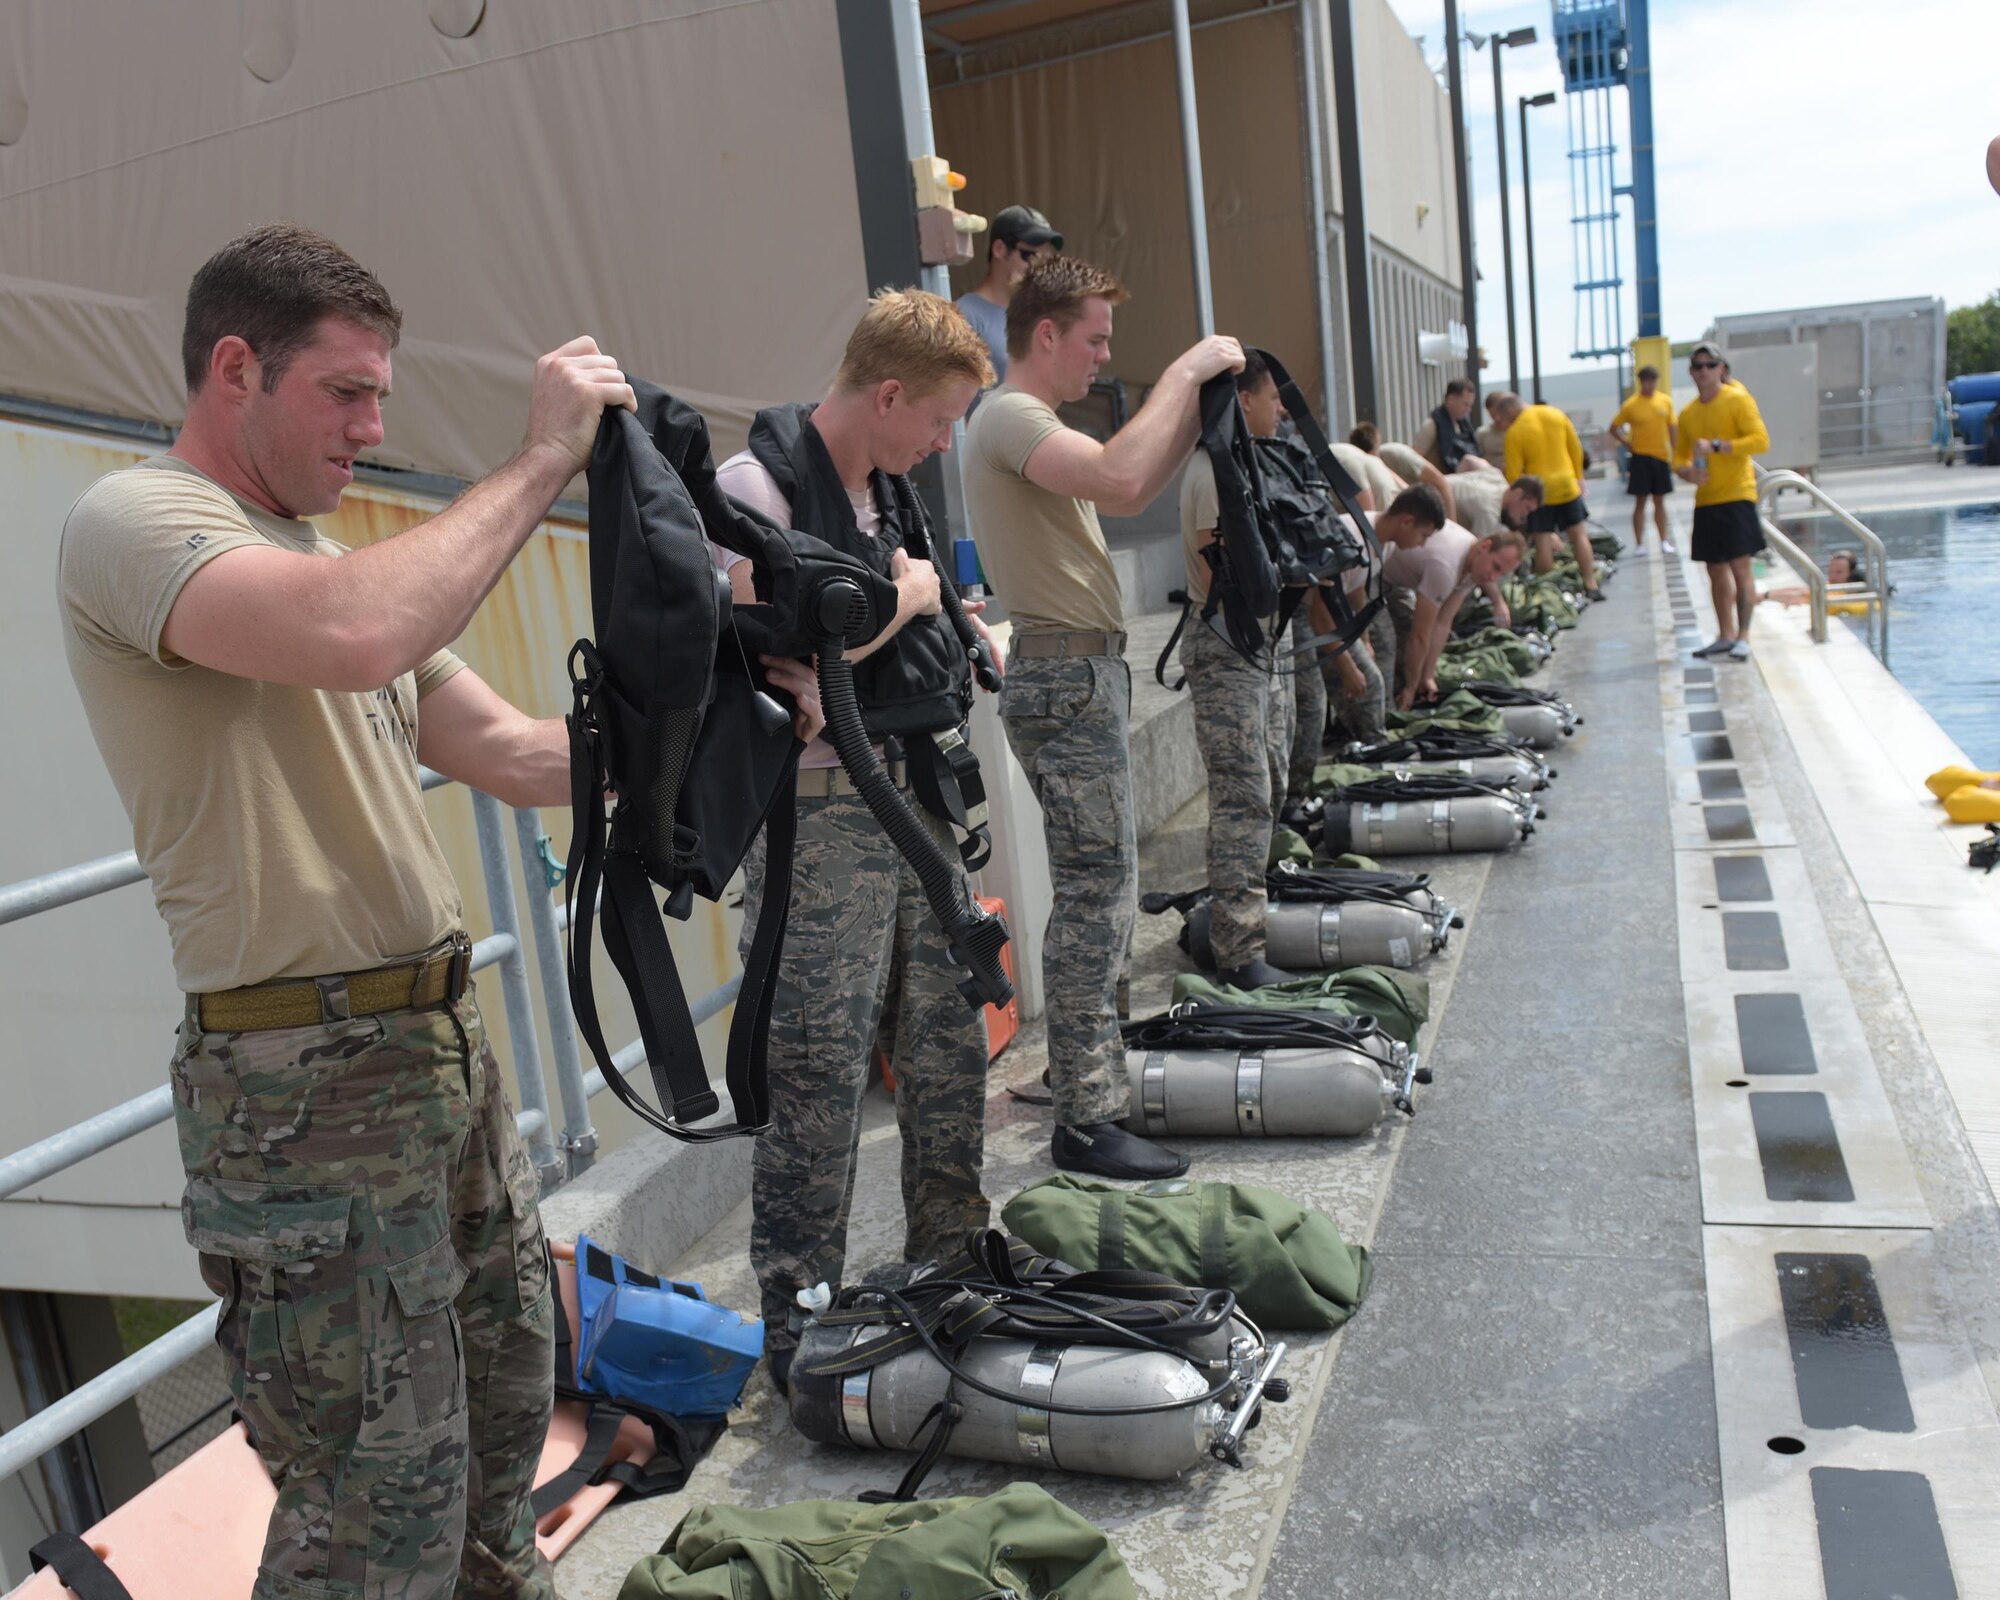 U.S. Air Force dive school students get their equipment ready for a training session at Naval Support Activity Panama City, Fla., Aug. 2, 2017. Both pararescue and combat controller Airmen get their dive training at the Naval Diving and Salvage Training Center.